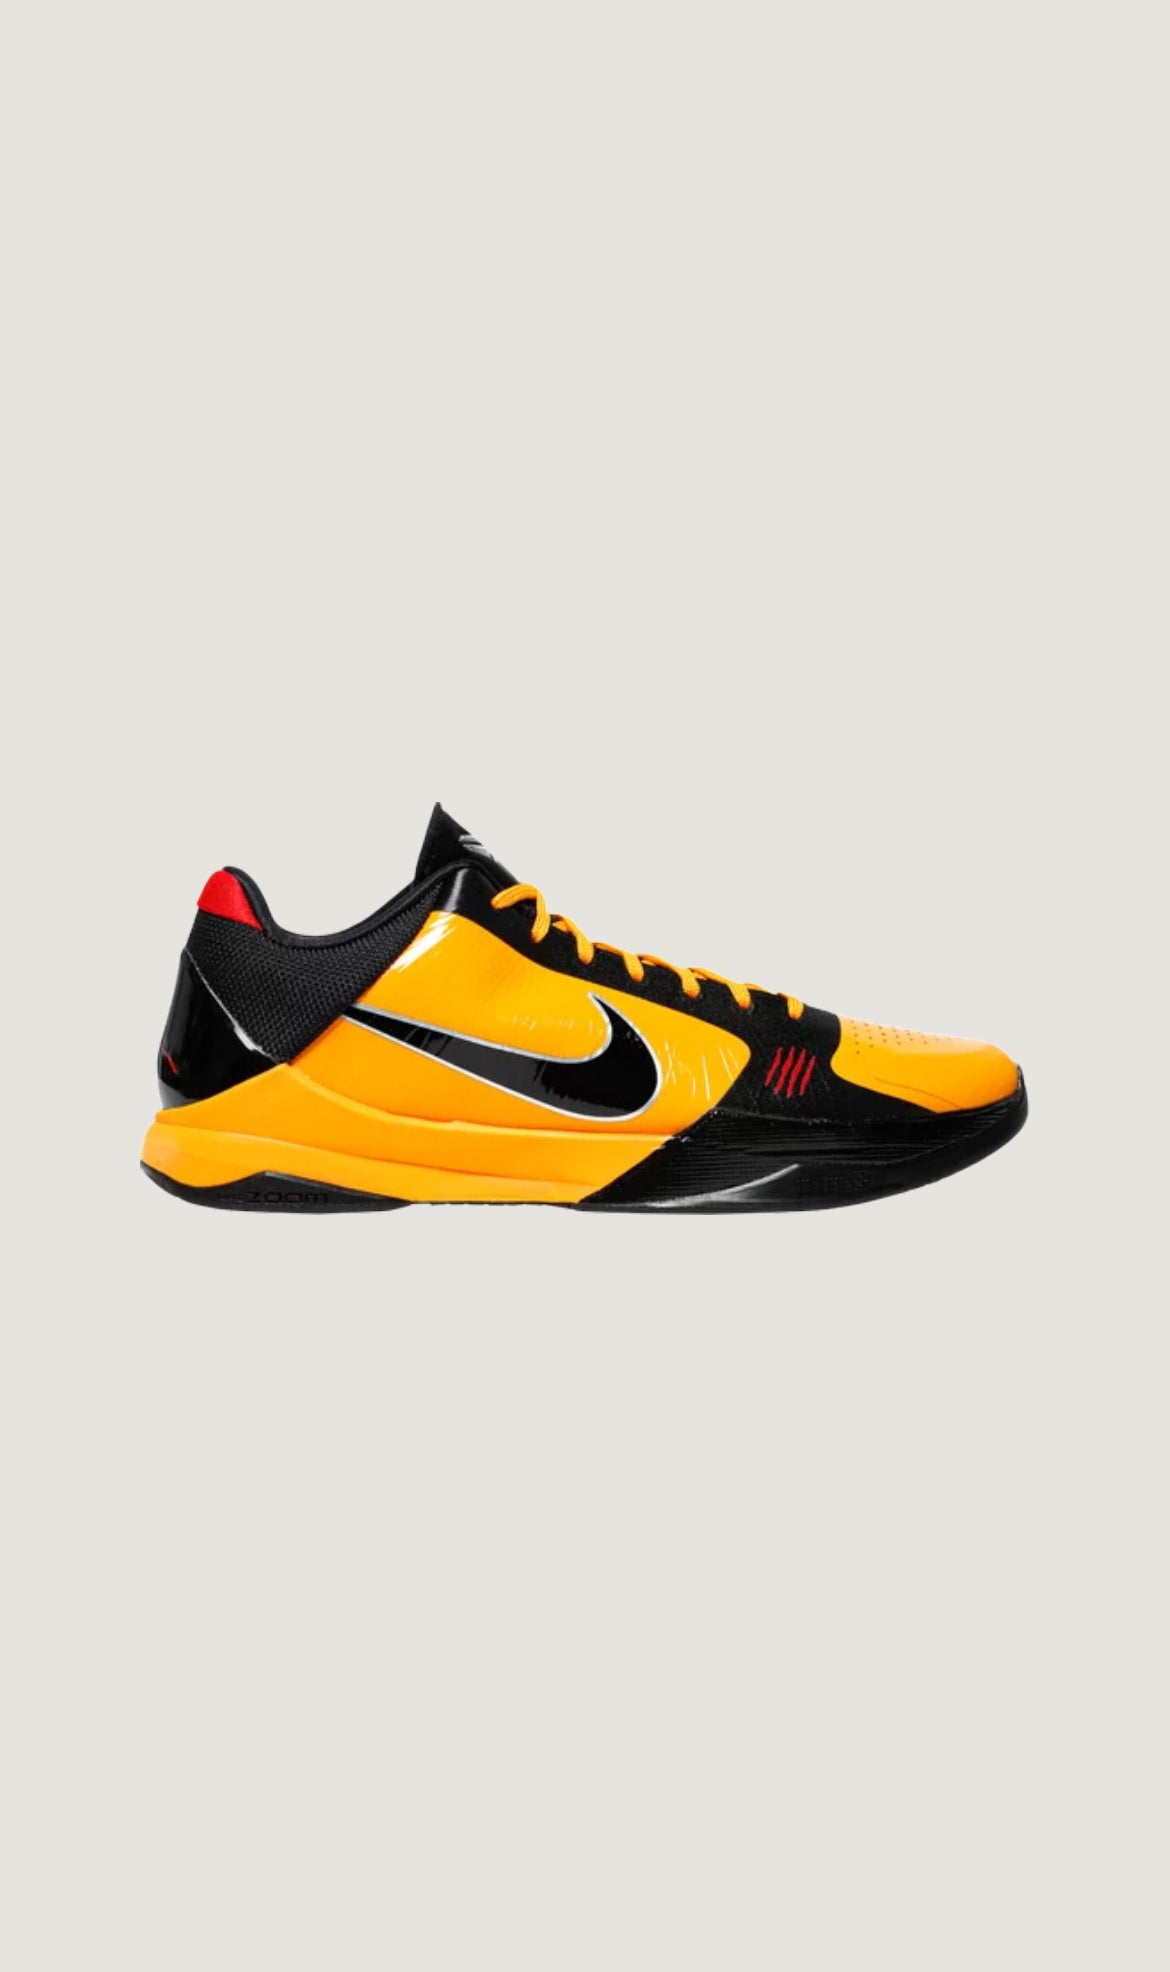 Load image into Gallery viewer, ZOOM KOBE 5 PROTRO - BRUCE LEE
